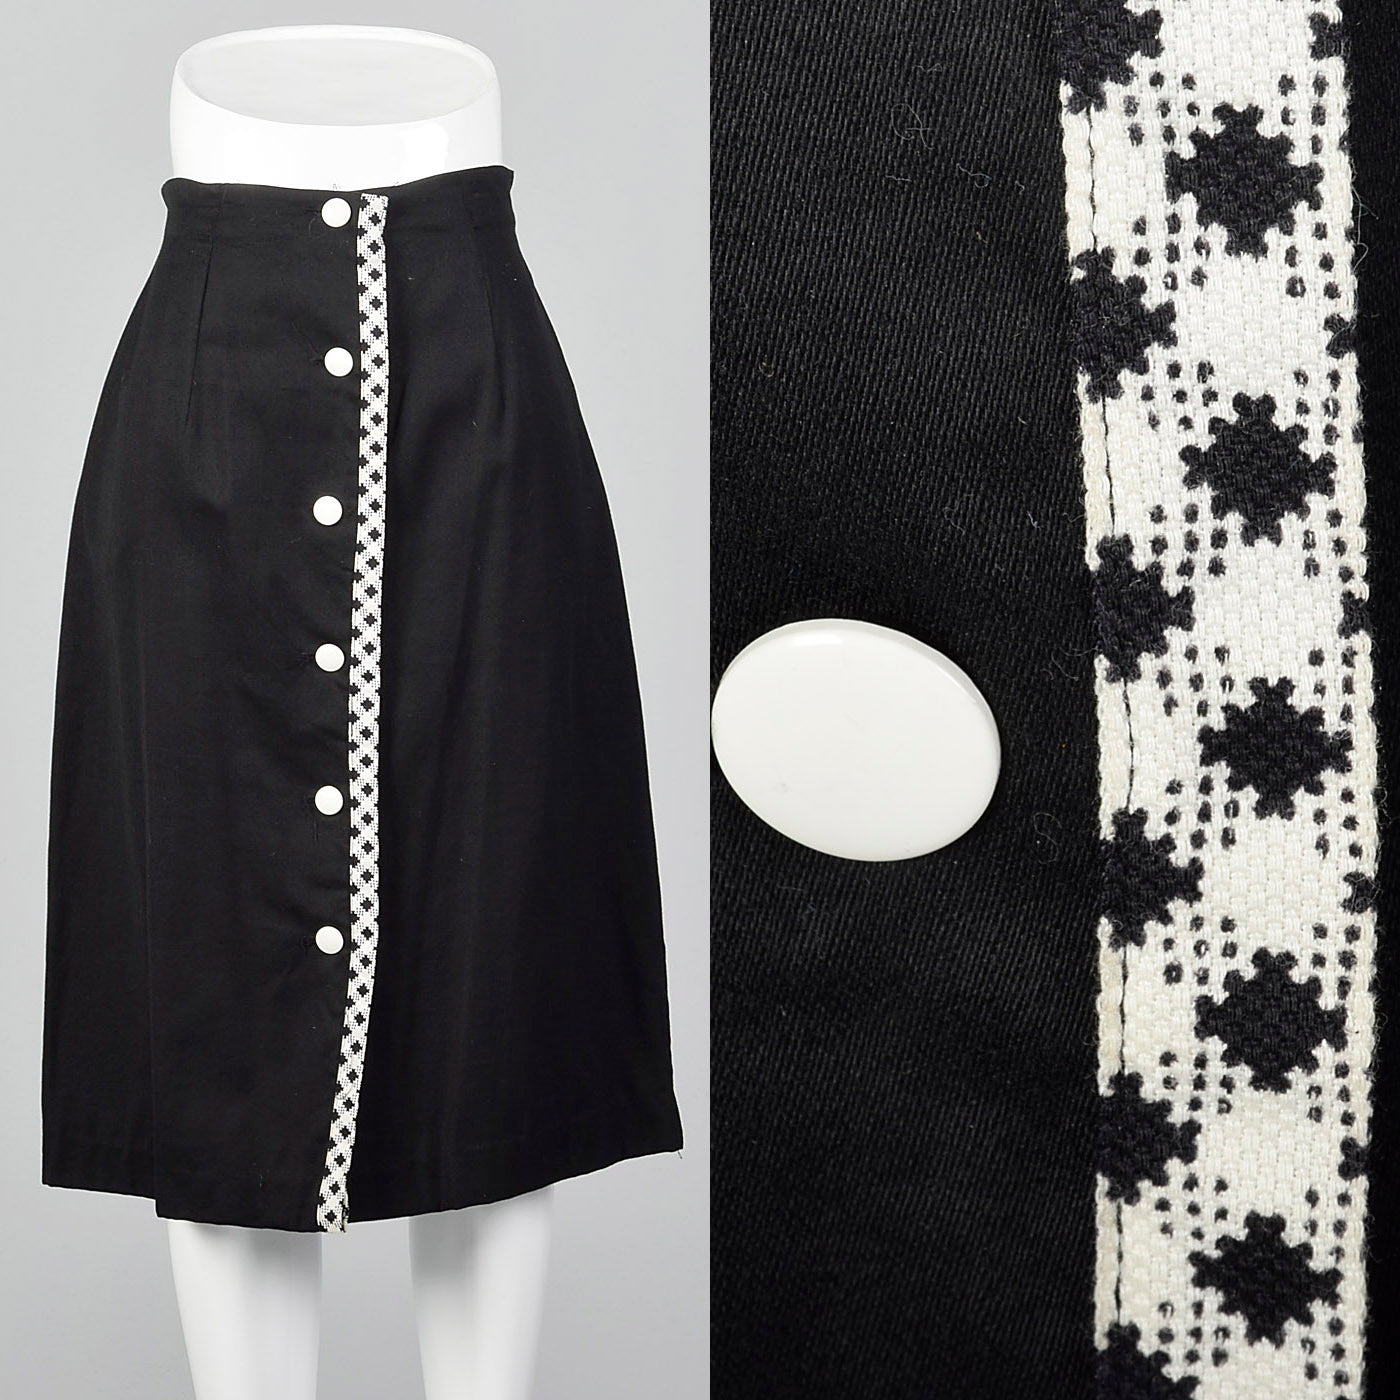 1960s Black Polished Cotton Skirt with White Trim